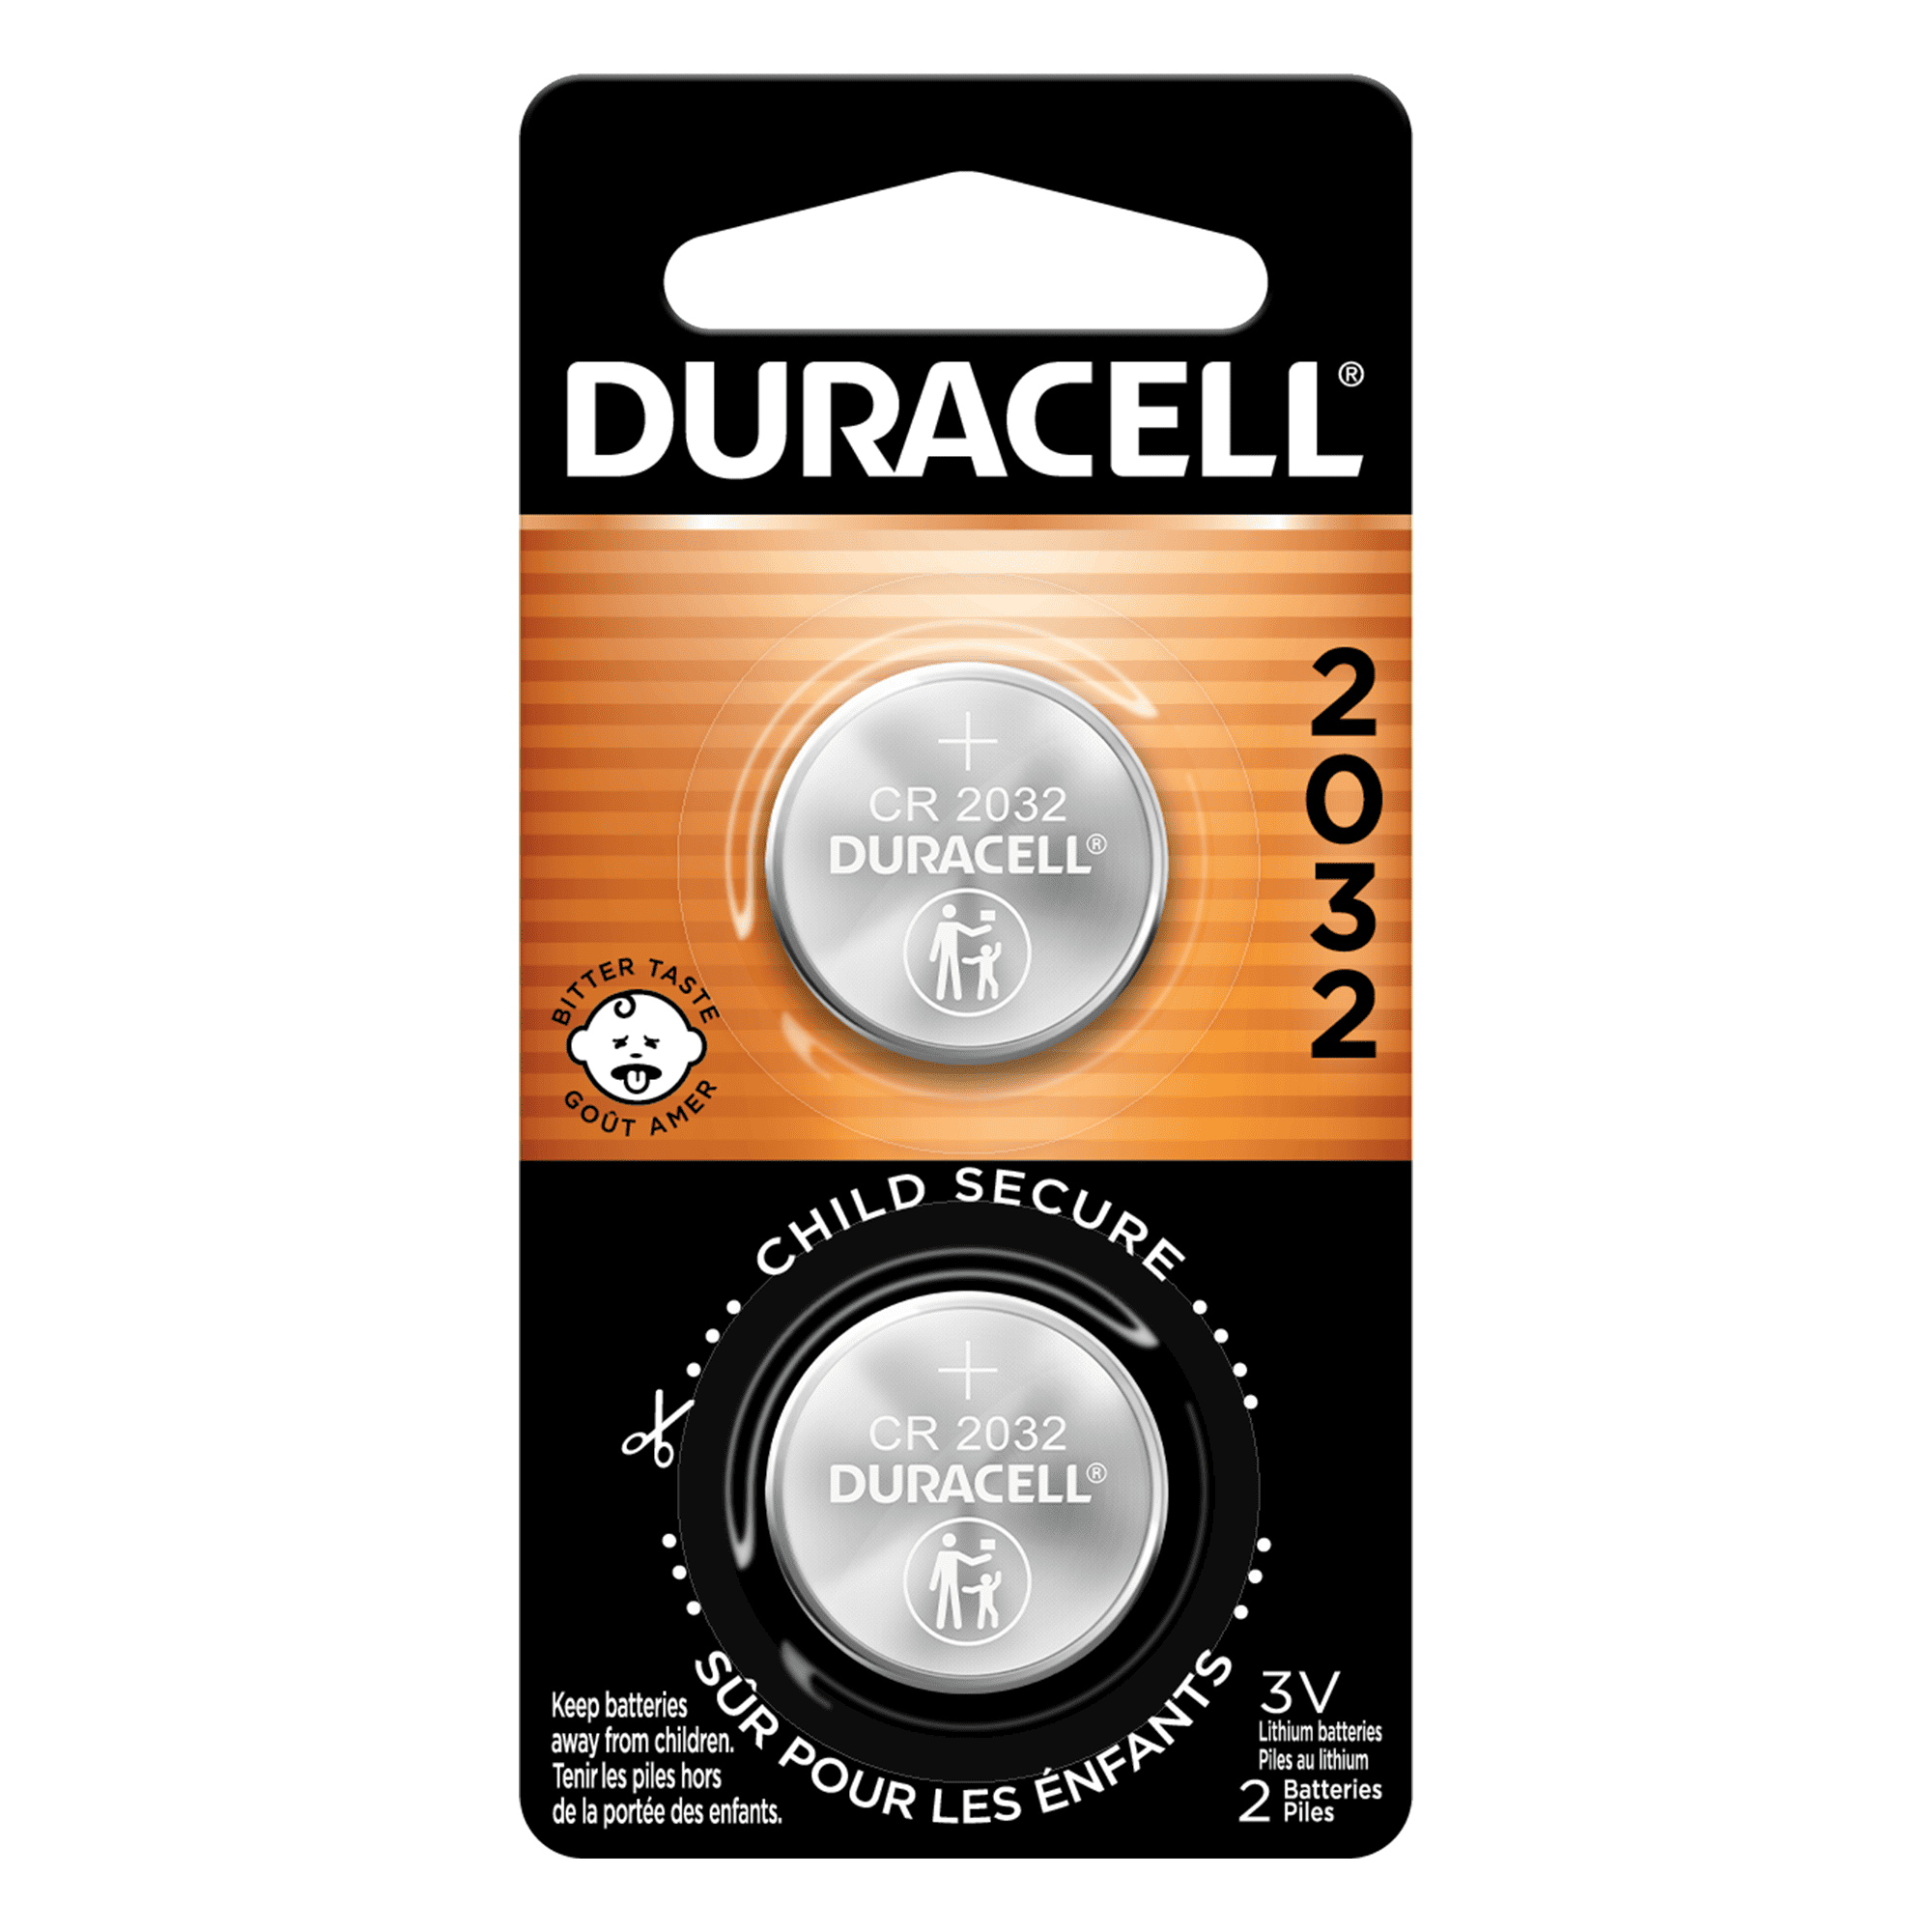 Duracell 2032 Lithium Coin Battery (2-Pack)